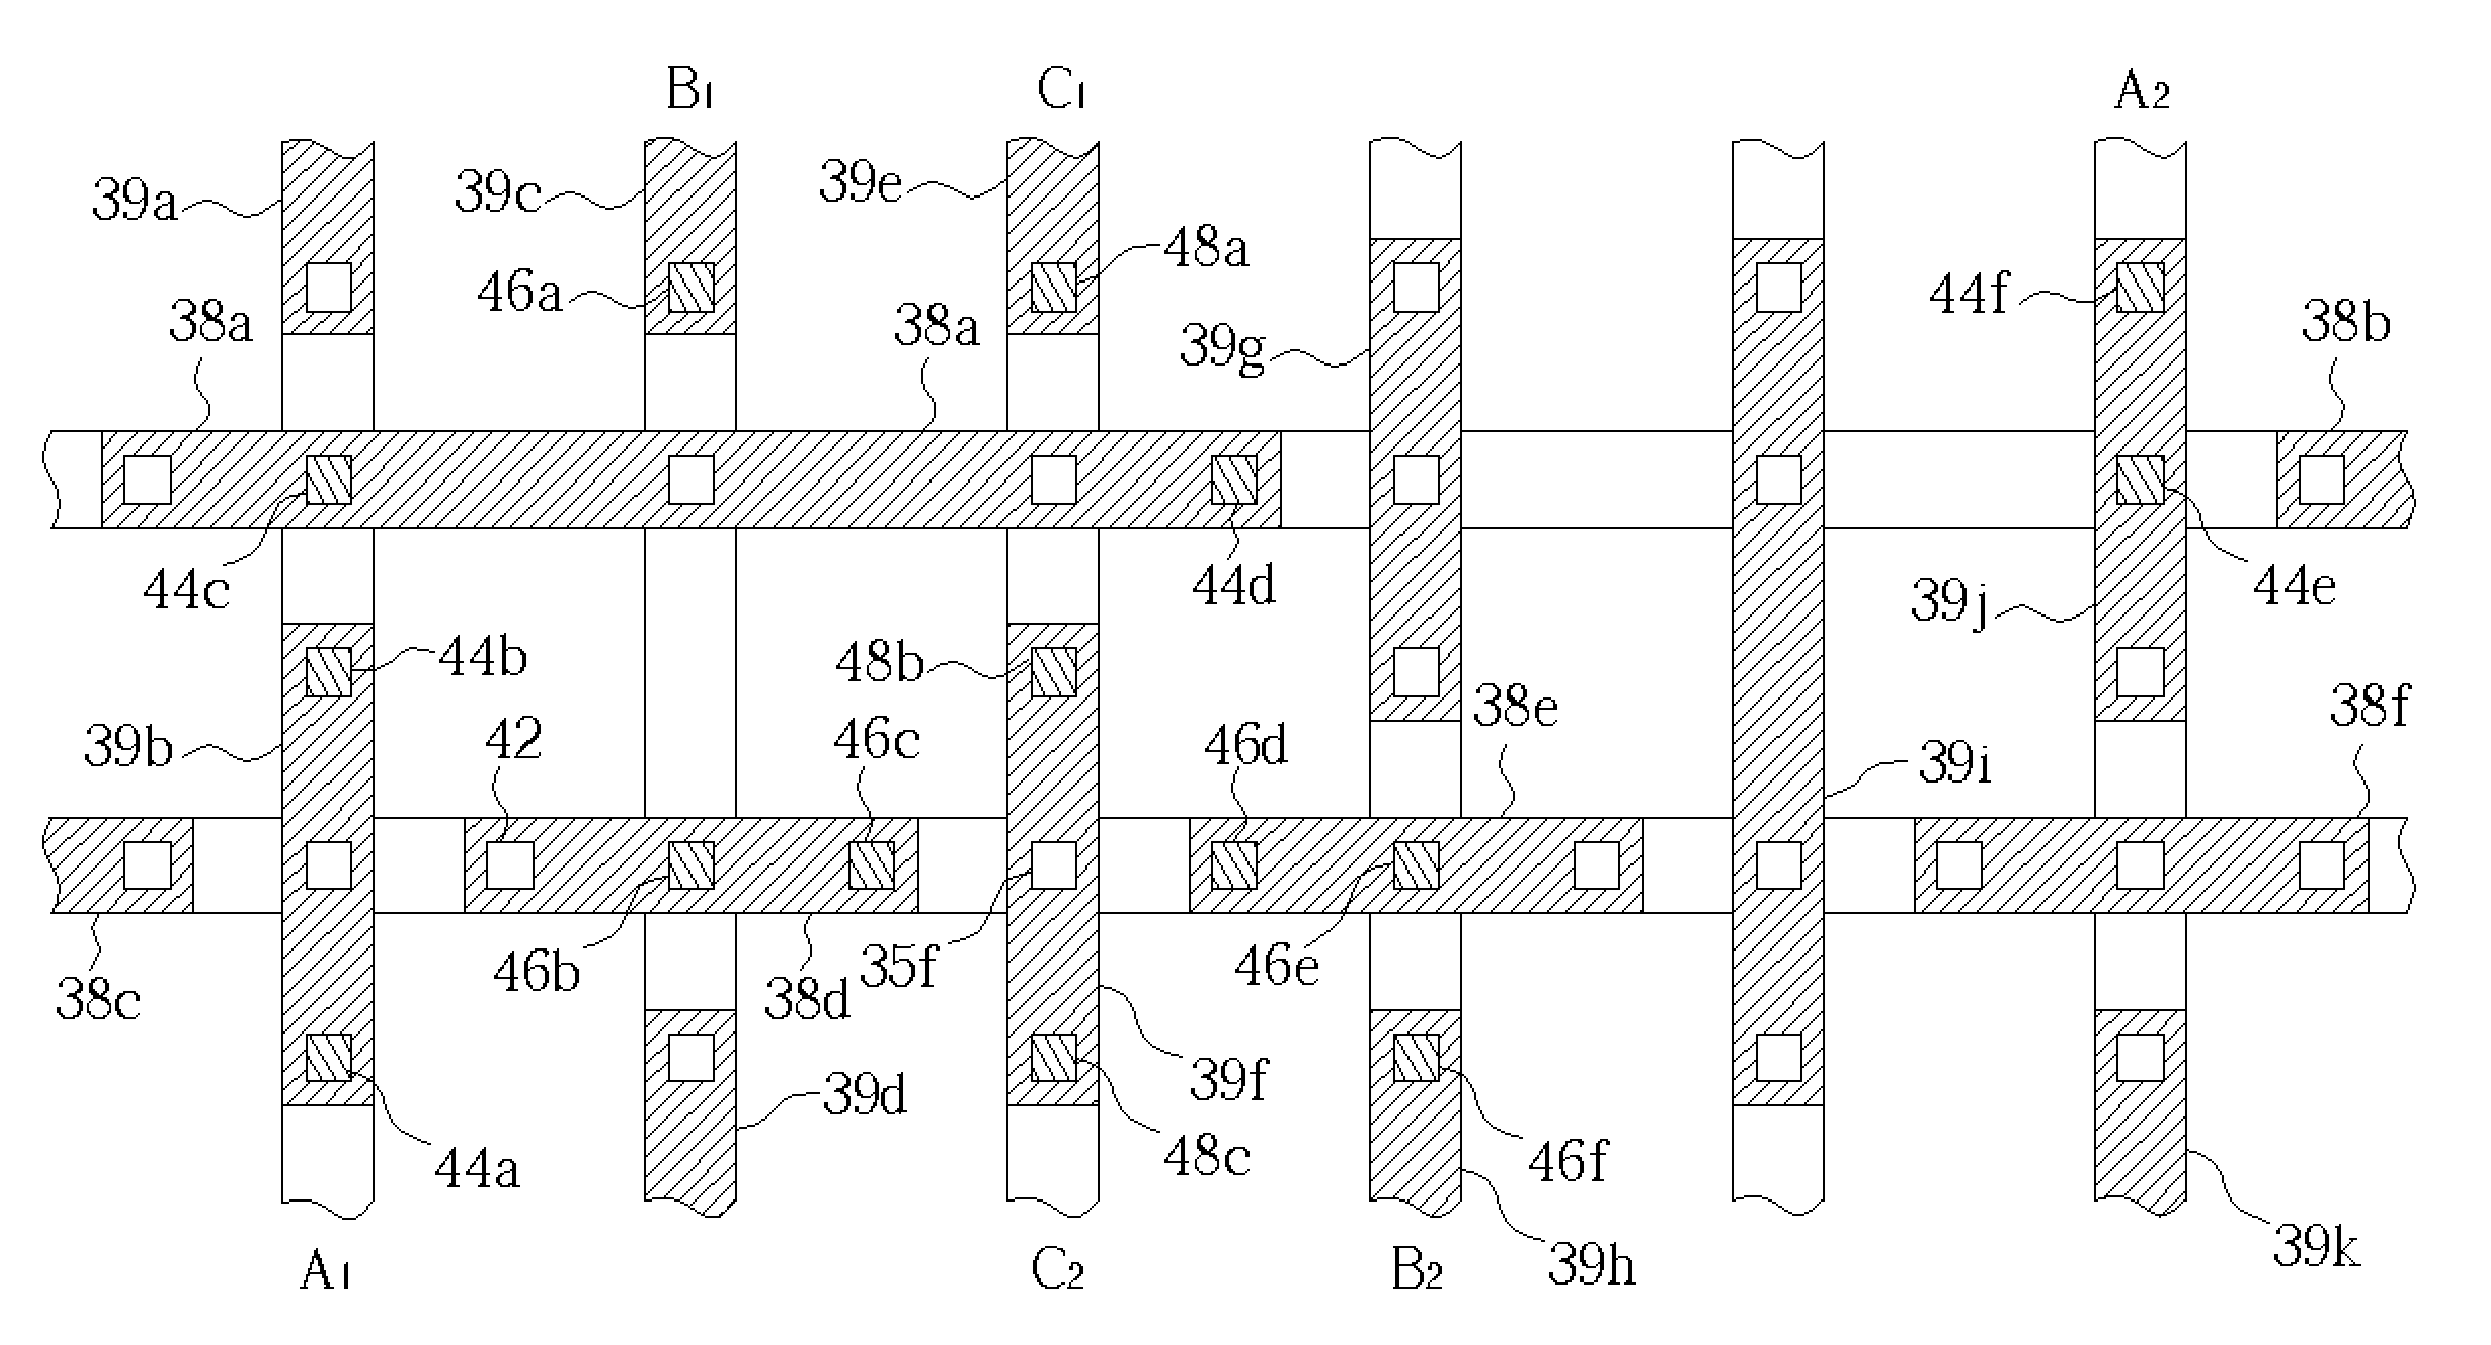 Method for programming a routing layout design through one via layer